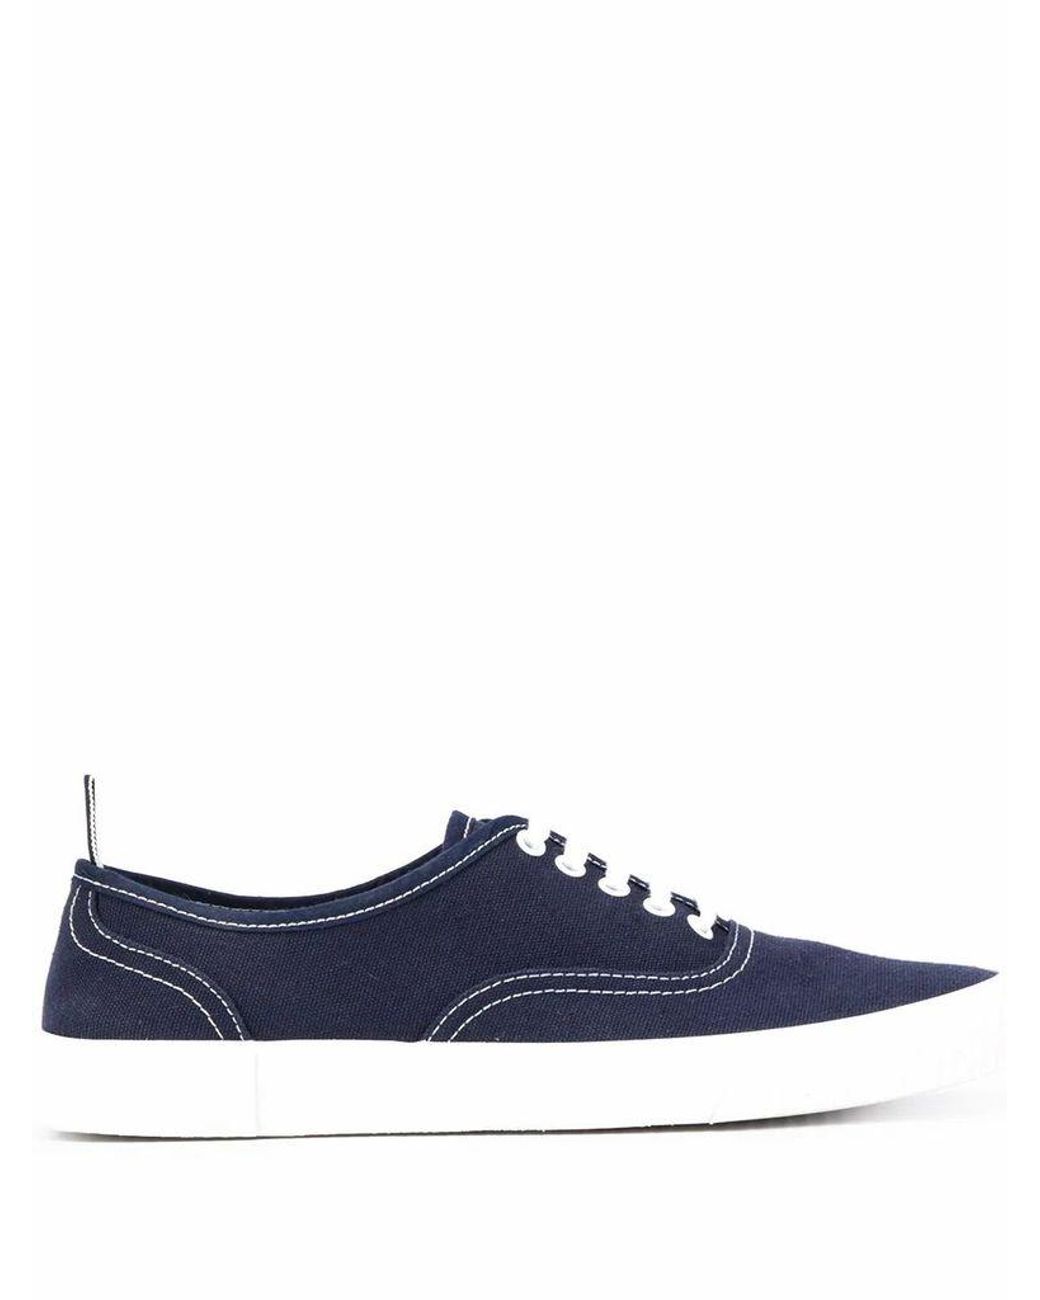 Thom Browne Men's Mfd201a01588415 Blue Cotton Sneakers for Men - Lyst